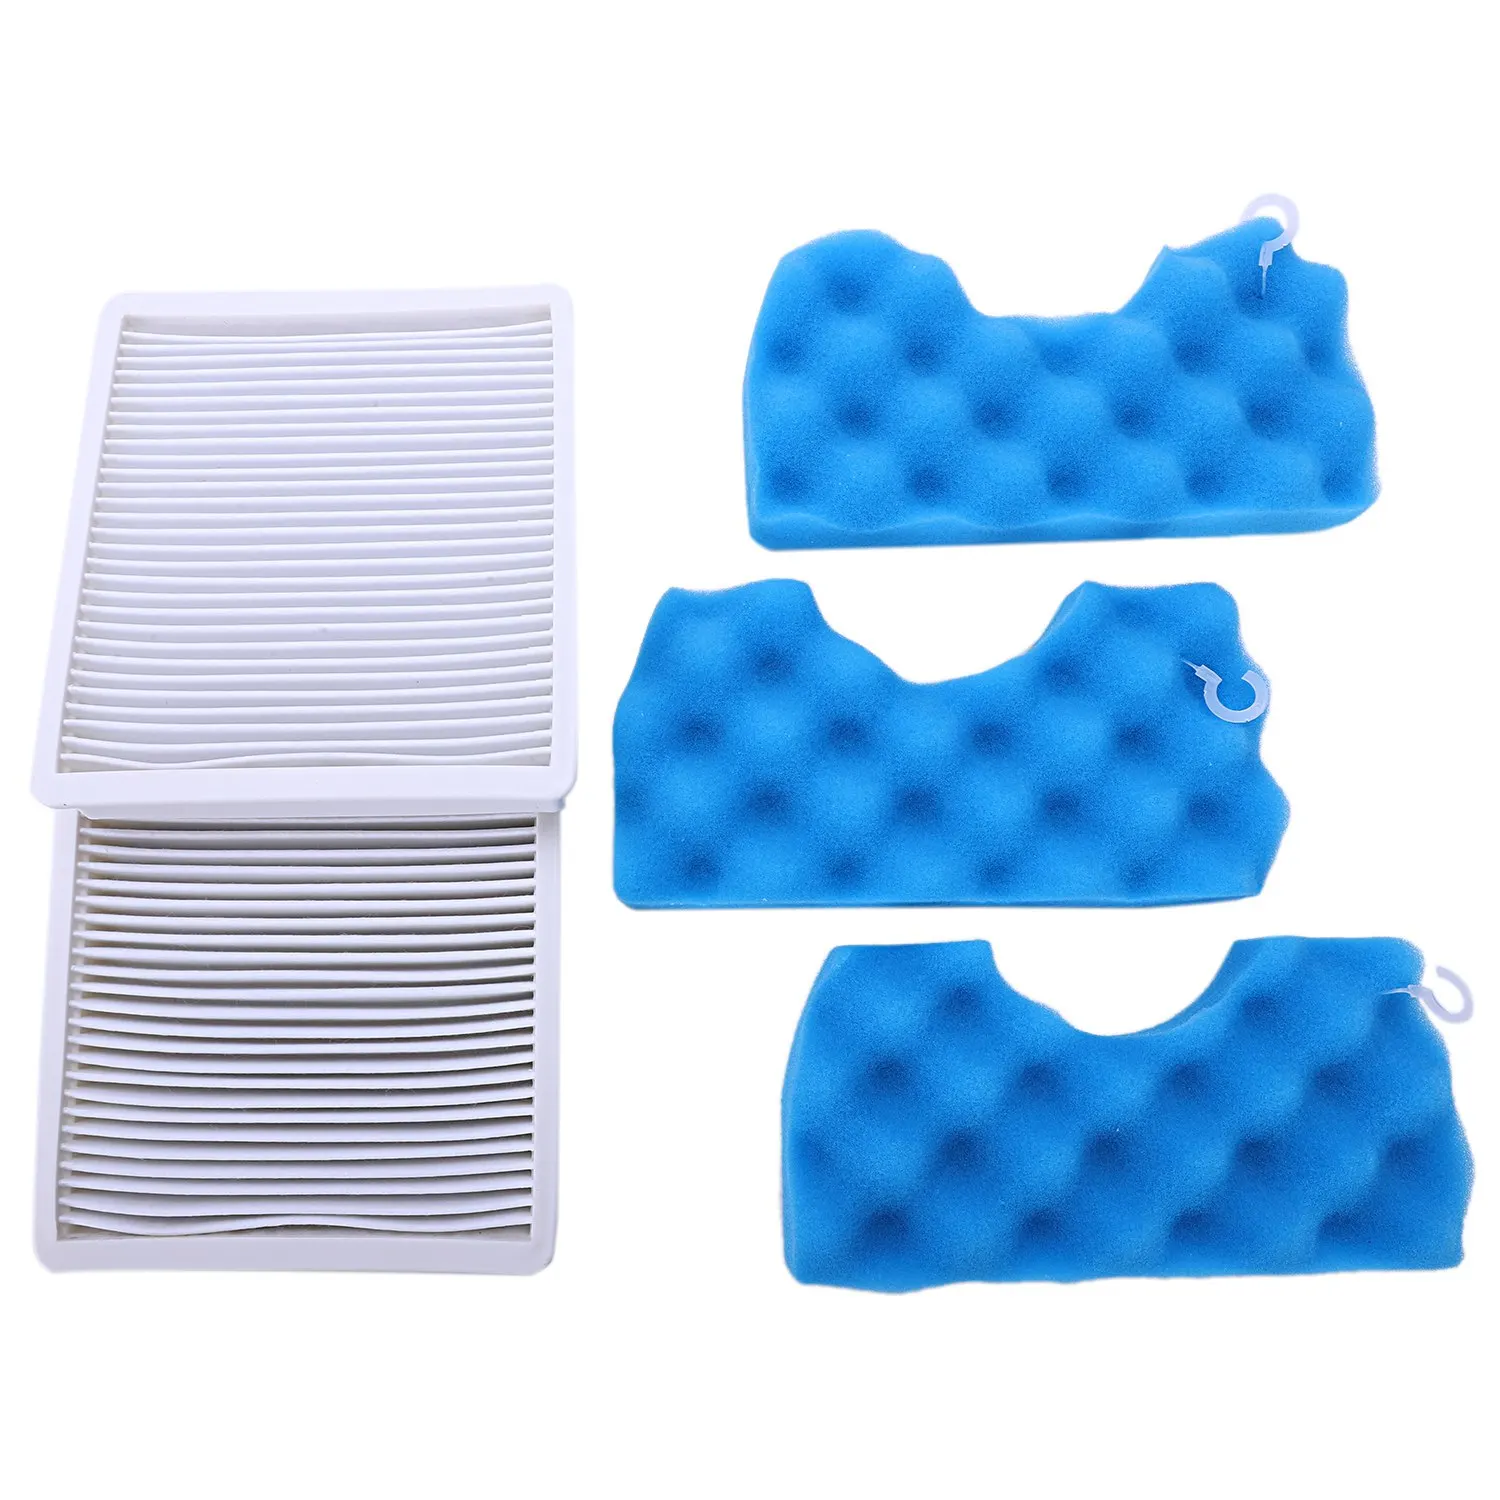 

2x Vacuum Cleaner Dust Filter Hepa Filter + 3xSet Of Filter Cotton For Samsung Sc4300 Sc4470 White Vc-B710W